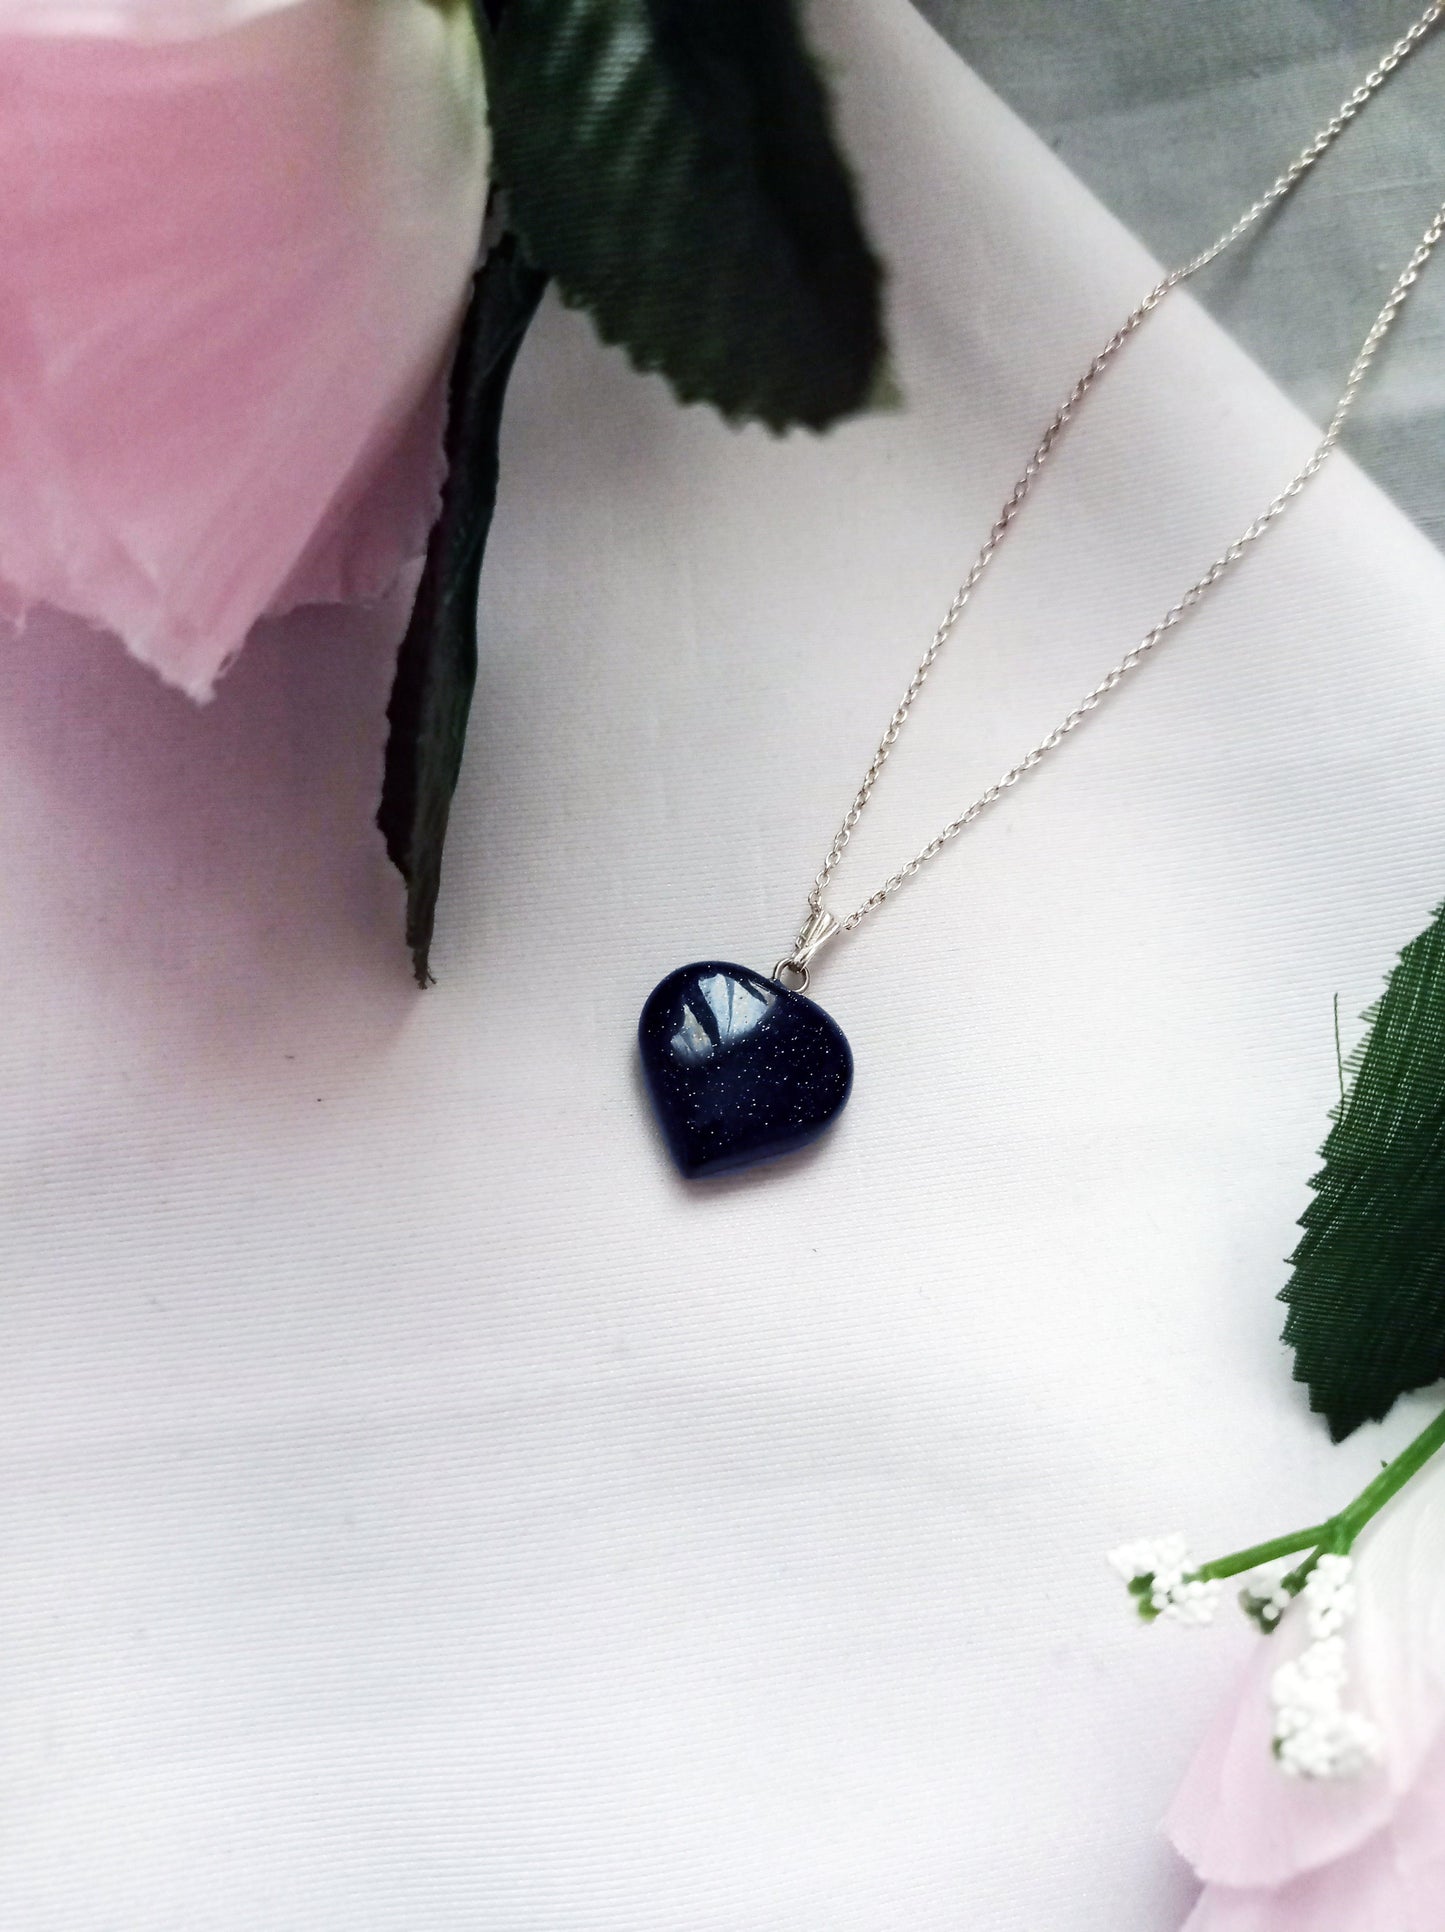 Blue Goldstone Sterling Silver Necklace, Heart Pendant Necklace, Gemstone Necklace, Sterling Silver Necklace | by nlanlaVictory-2